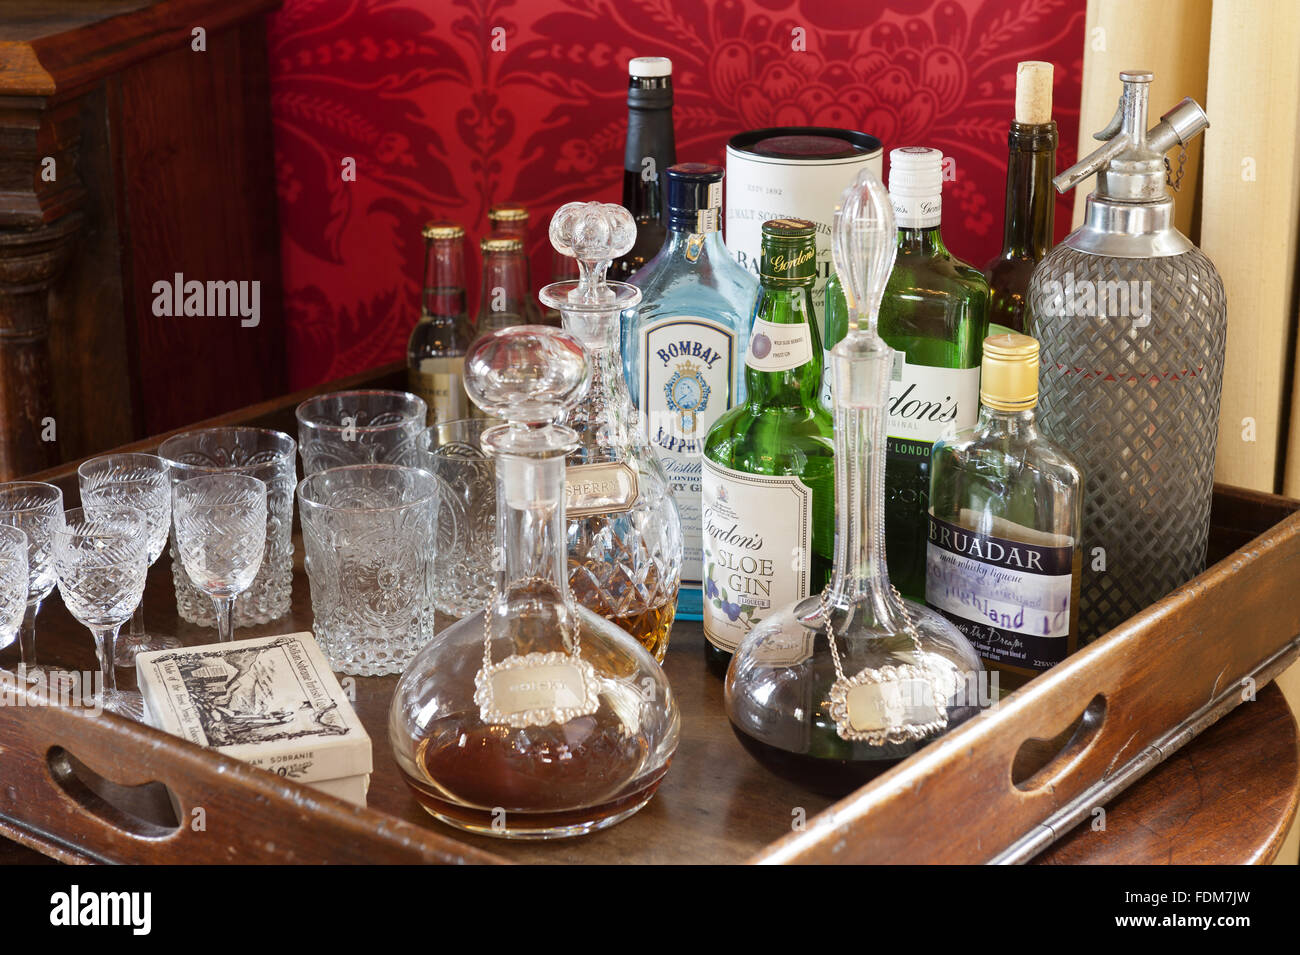 The drinks tray with glass decanters and bottles in the Saloon at Coughton Court, Warwickshire. Stock Photo